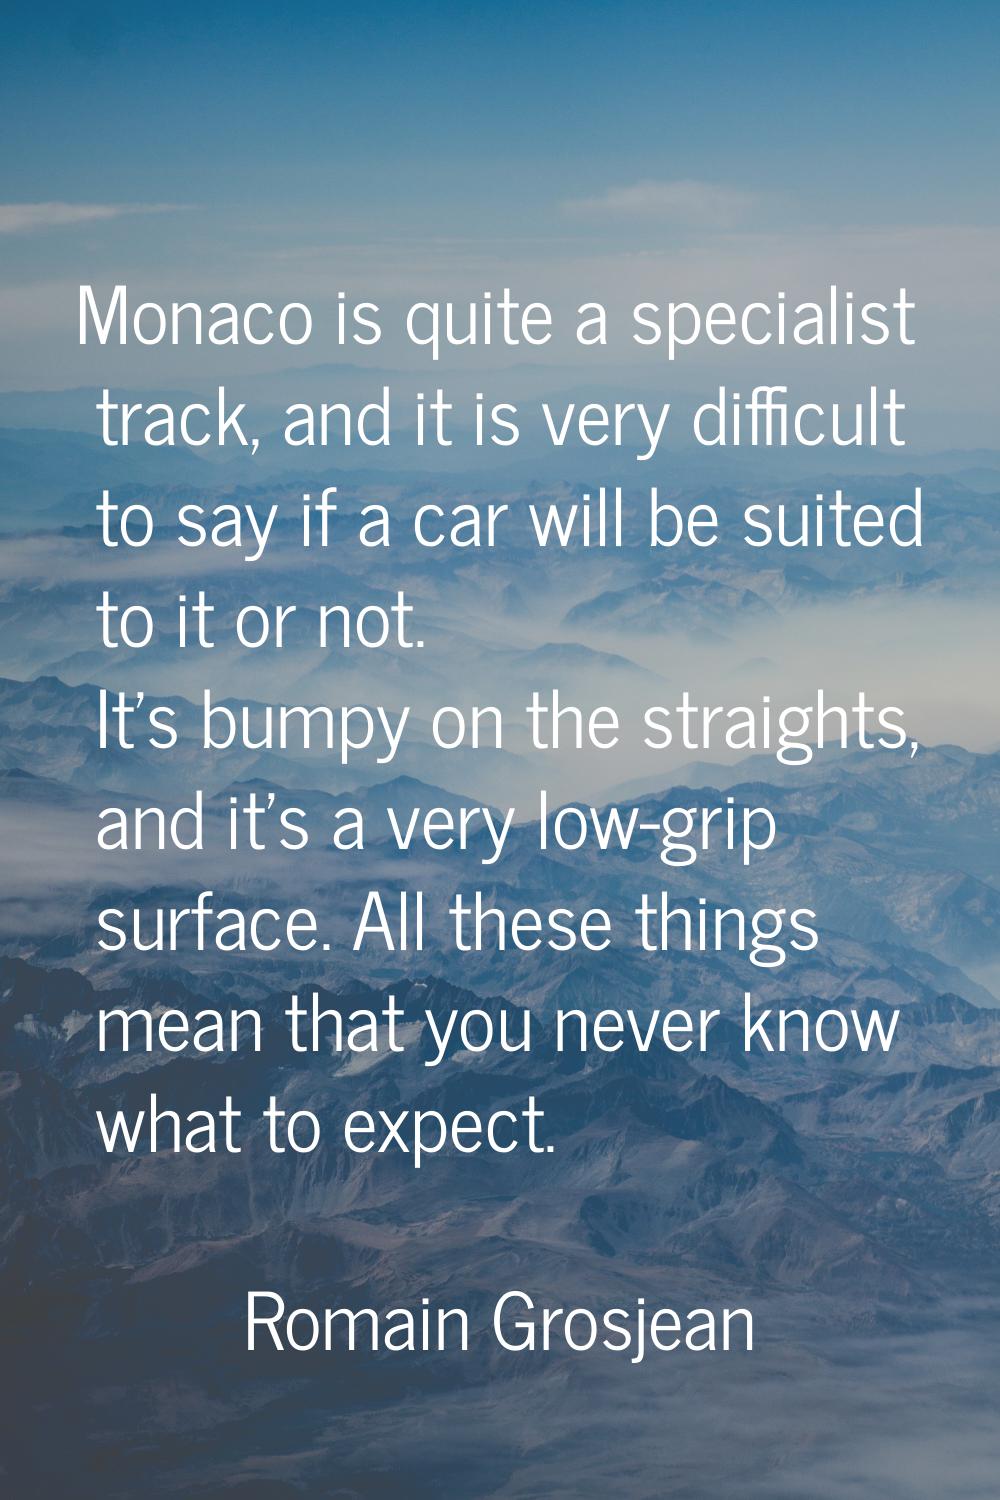 Monaco is quite a specialist track, and it is very difficult to say if a car will be suited to it o